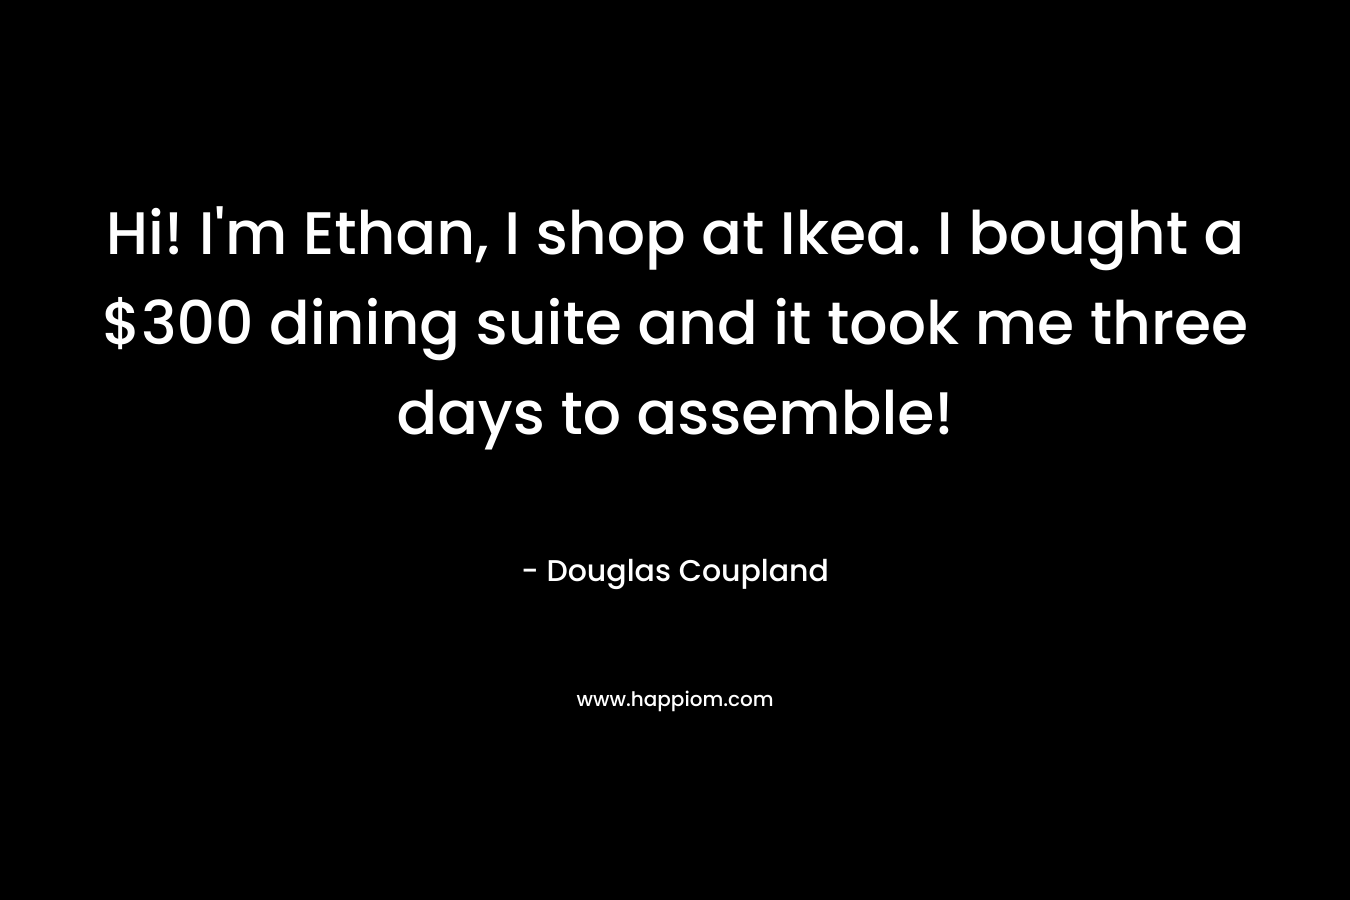 Hi! I’m Ethan, I shop at Ikea. I bought a $300 dining suite and it took me three days to assemble! – Douglas Coupland